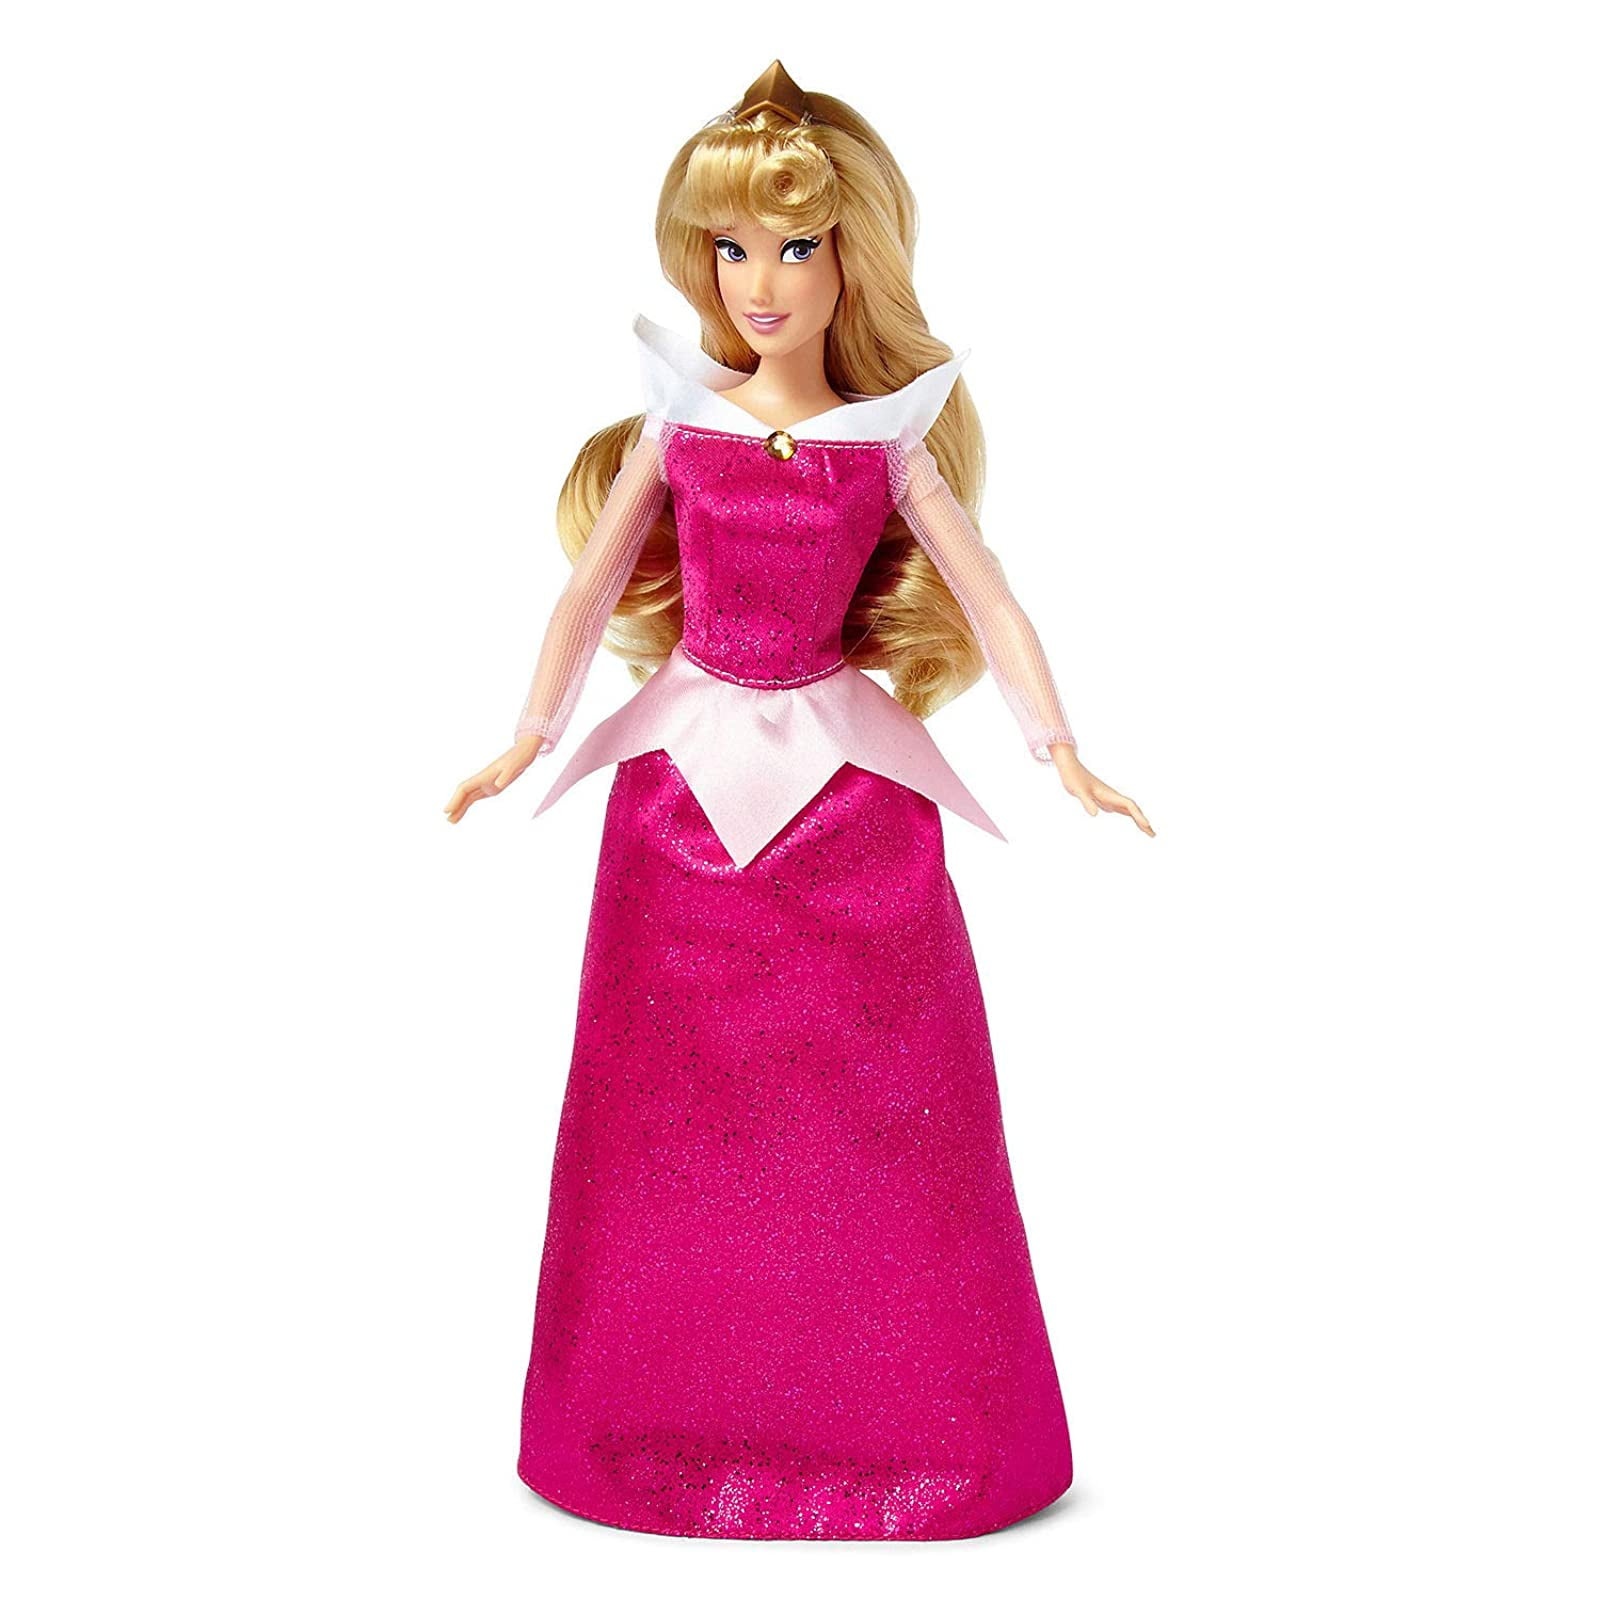 Details about   Disney Princess Aurora Sleeping Beauty Doll Light Up Dress With Magical Sounds 